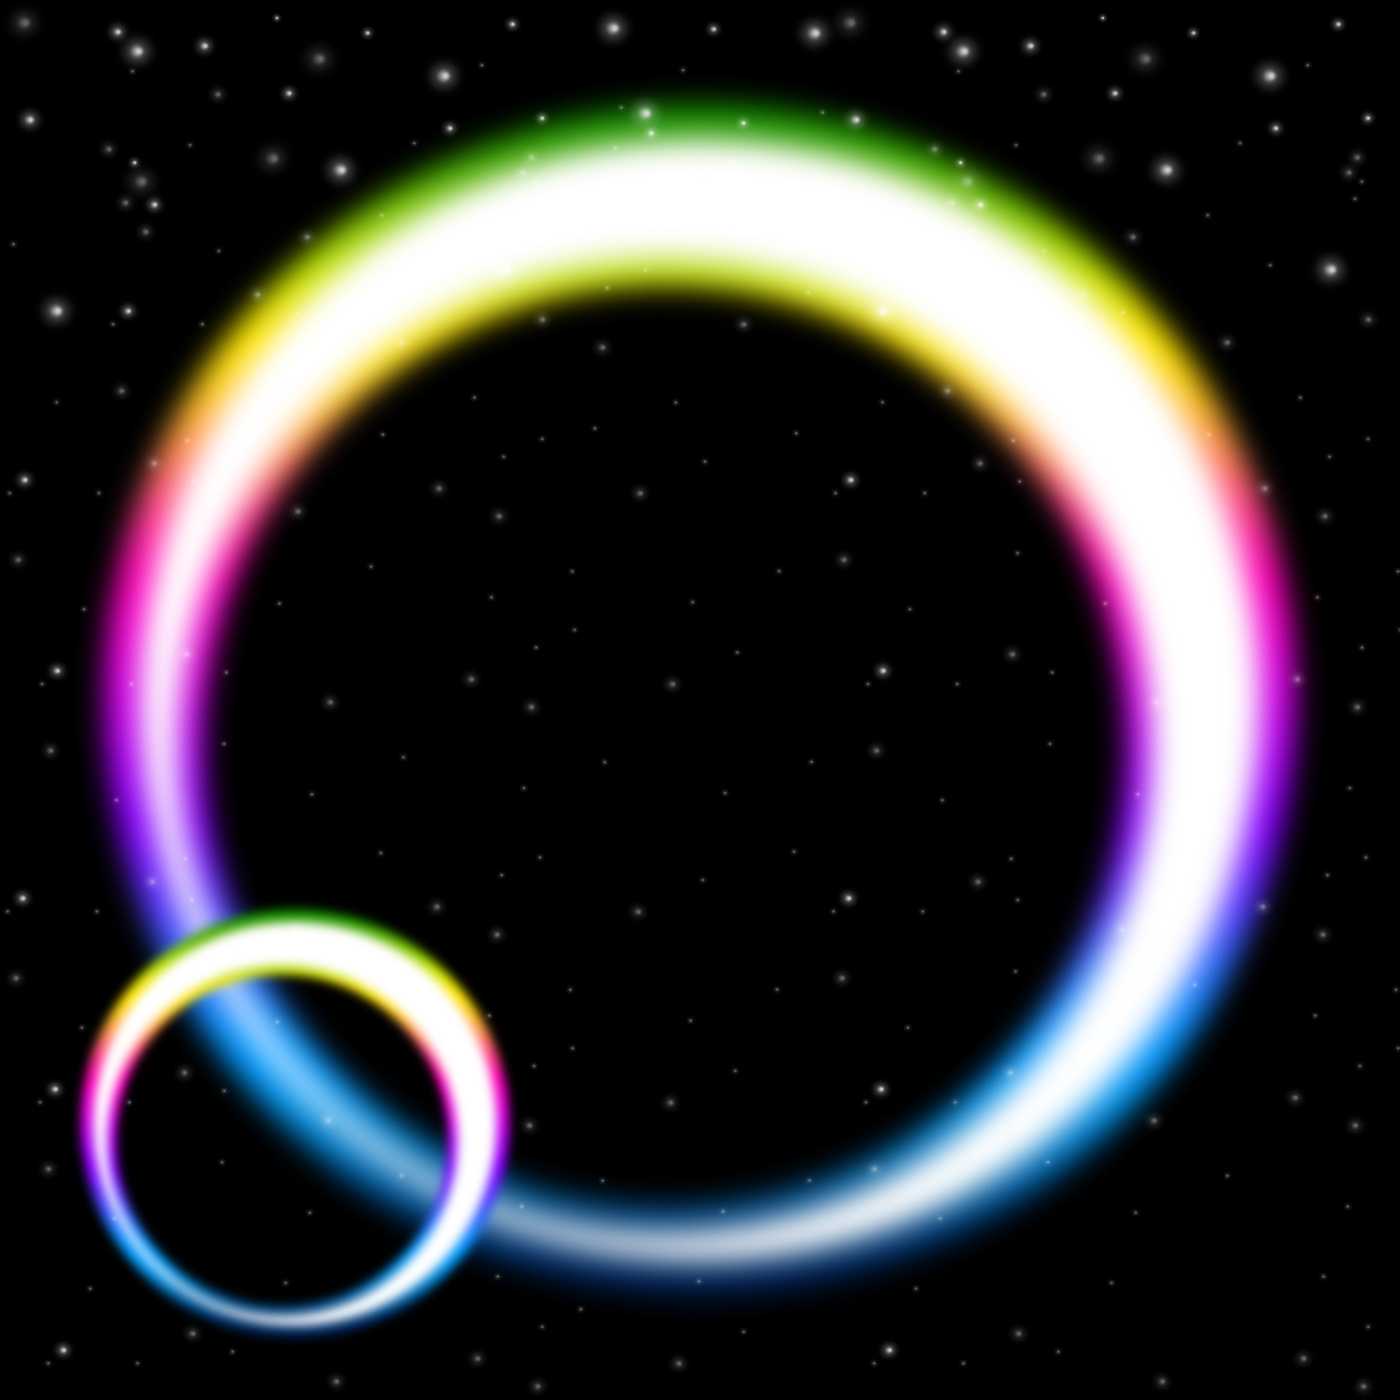 Rainbow circles background shows colorful bands in space photo